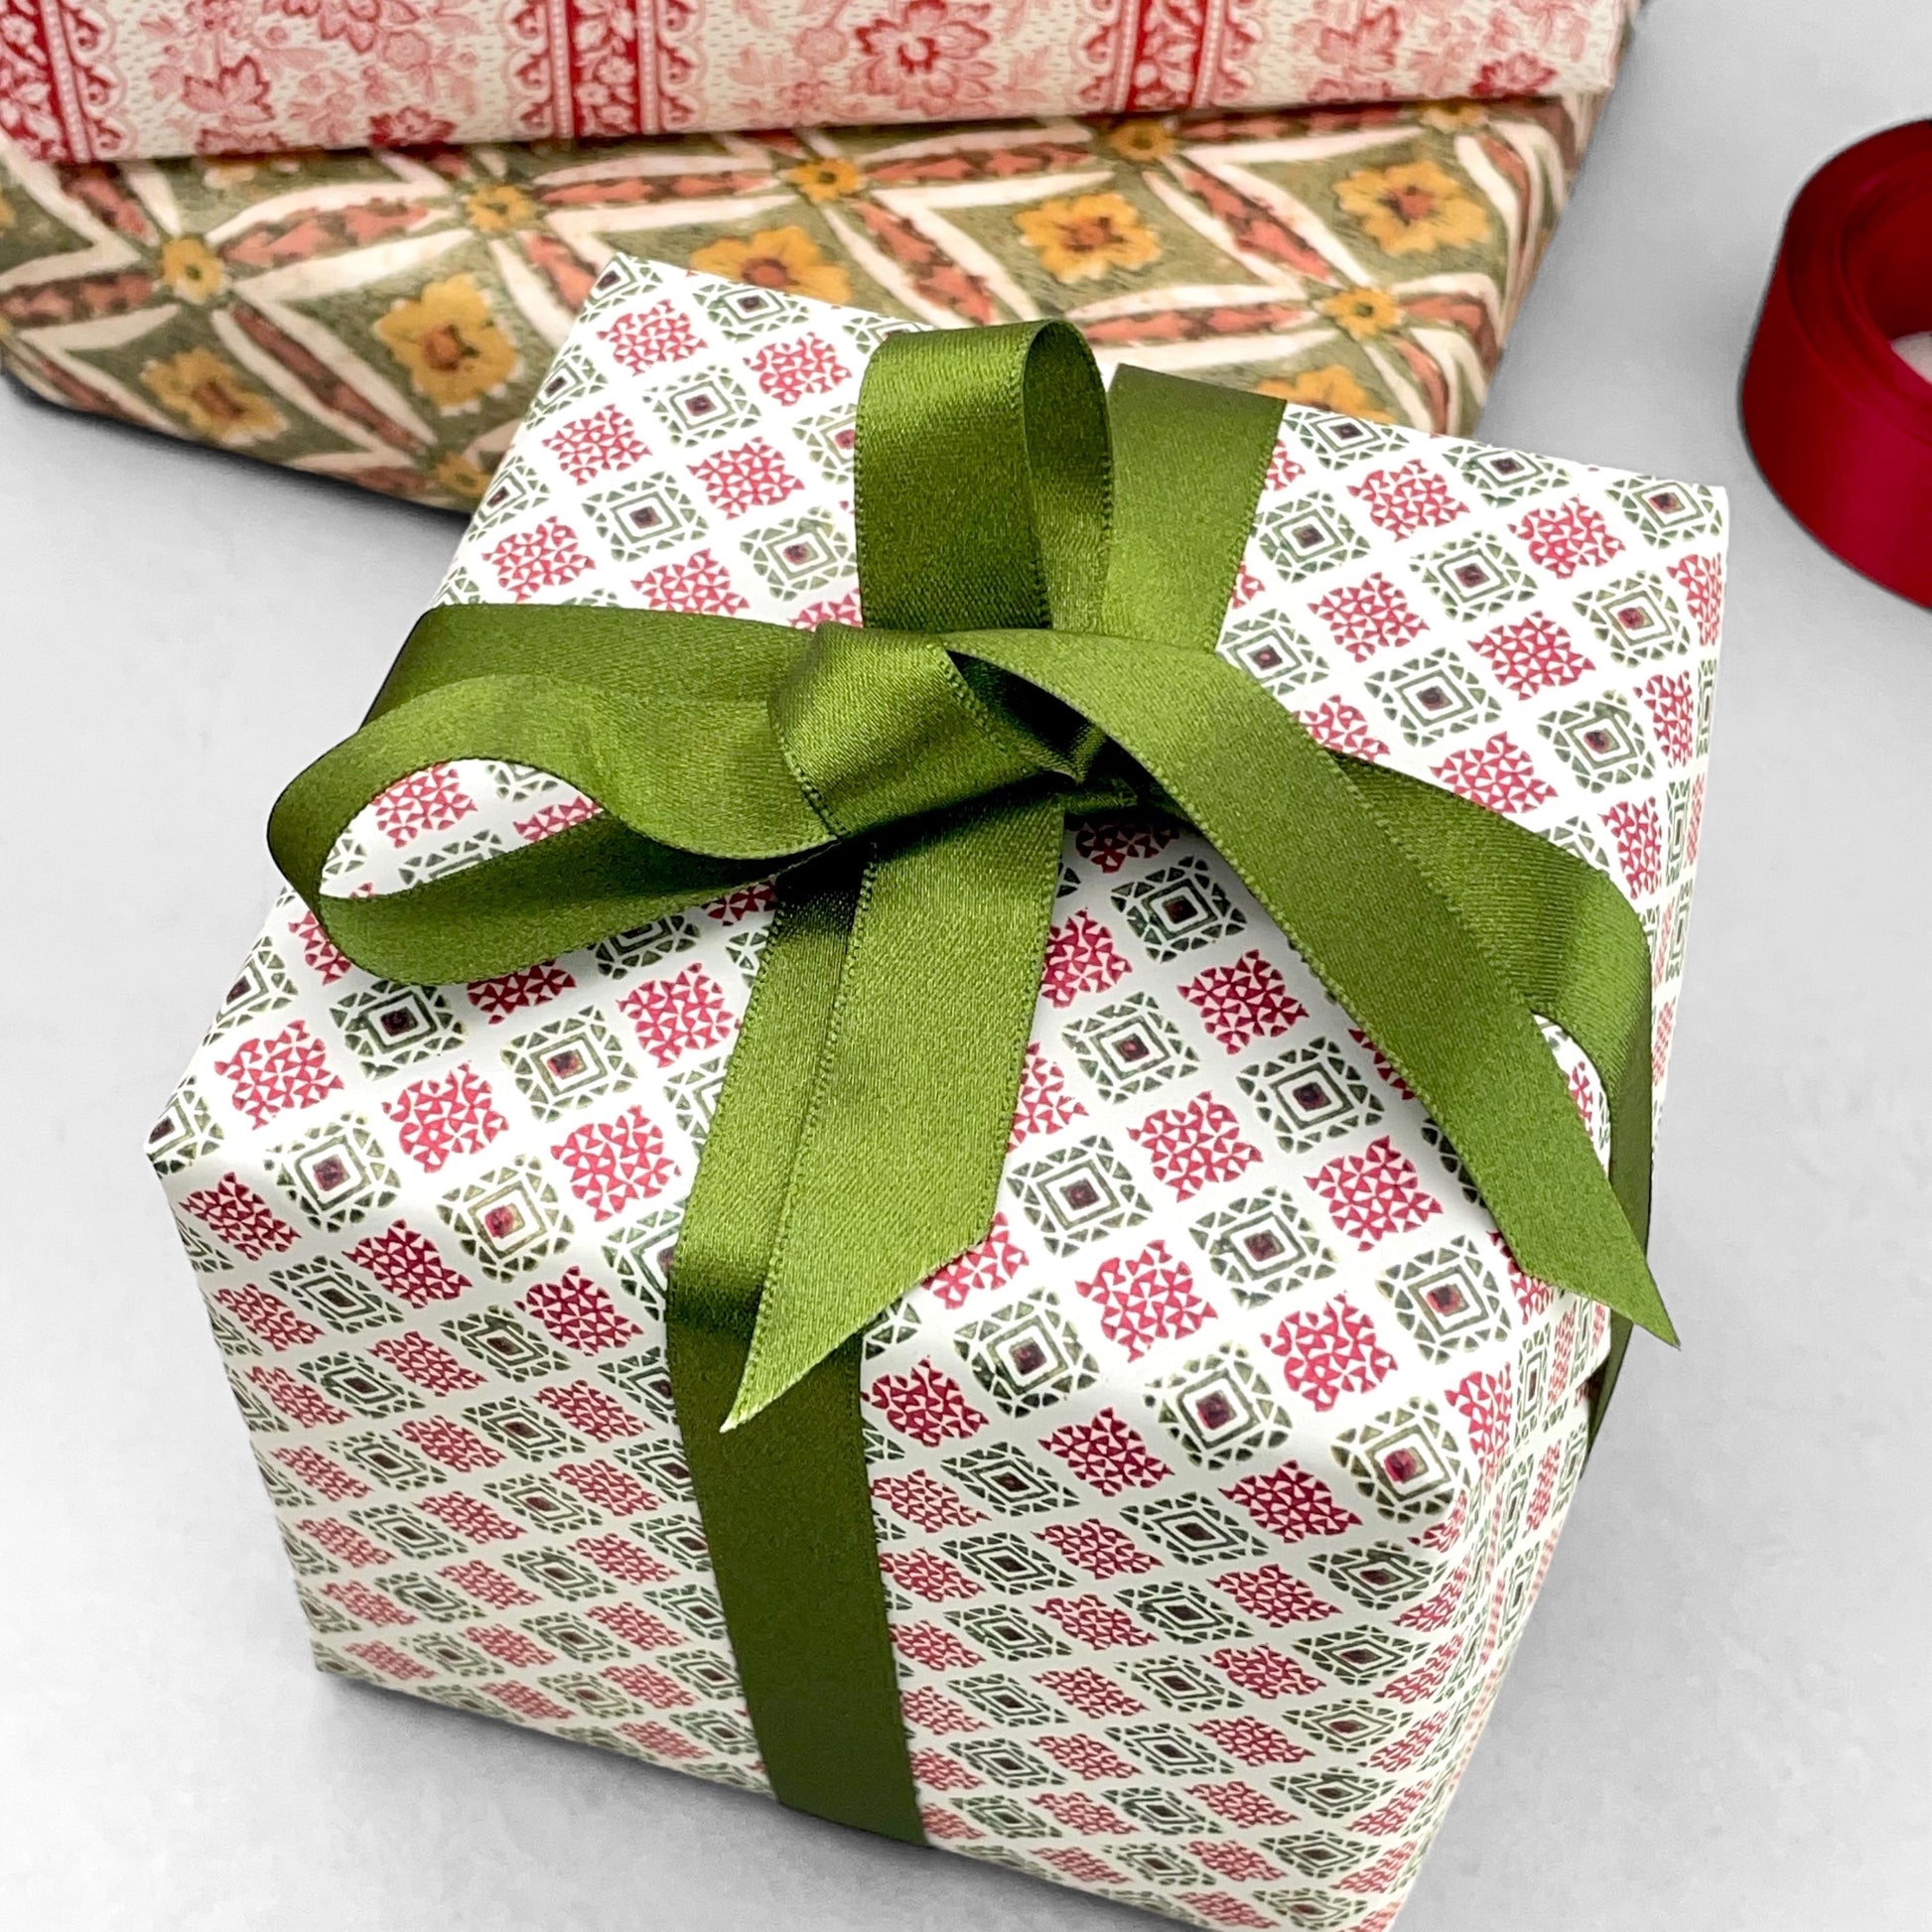 italian Remondini patterned wrapping paper by Tassotti. Block print style red and green diamonds on a white background. Wrapped as a present with a green bow